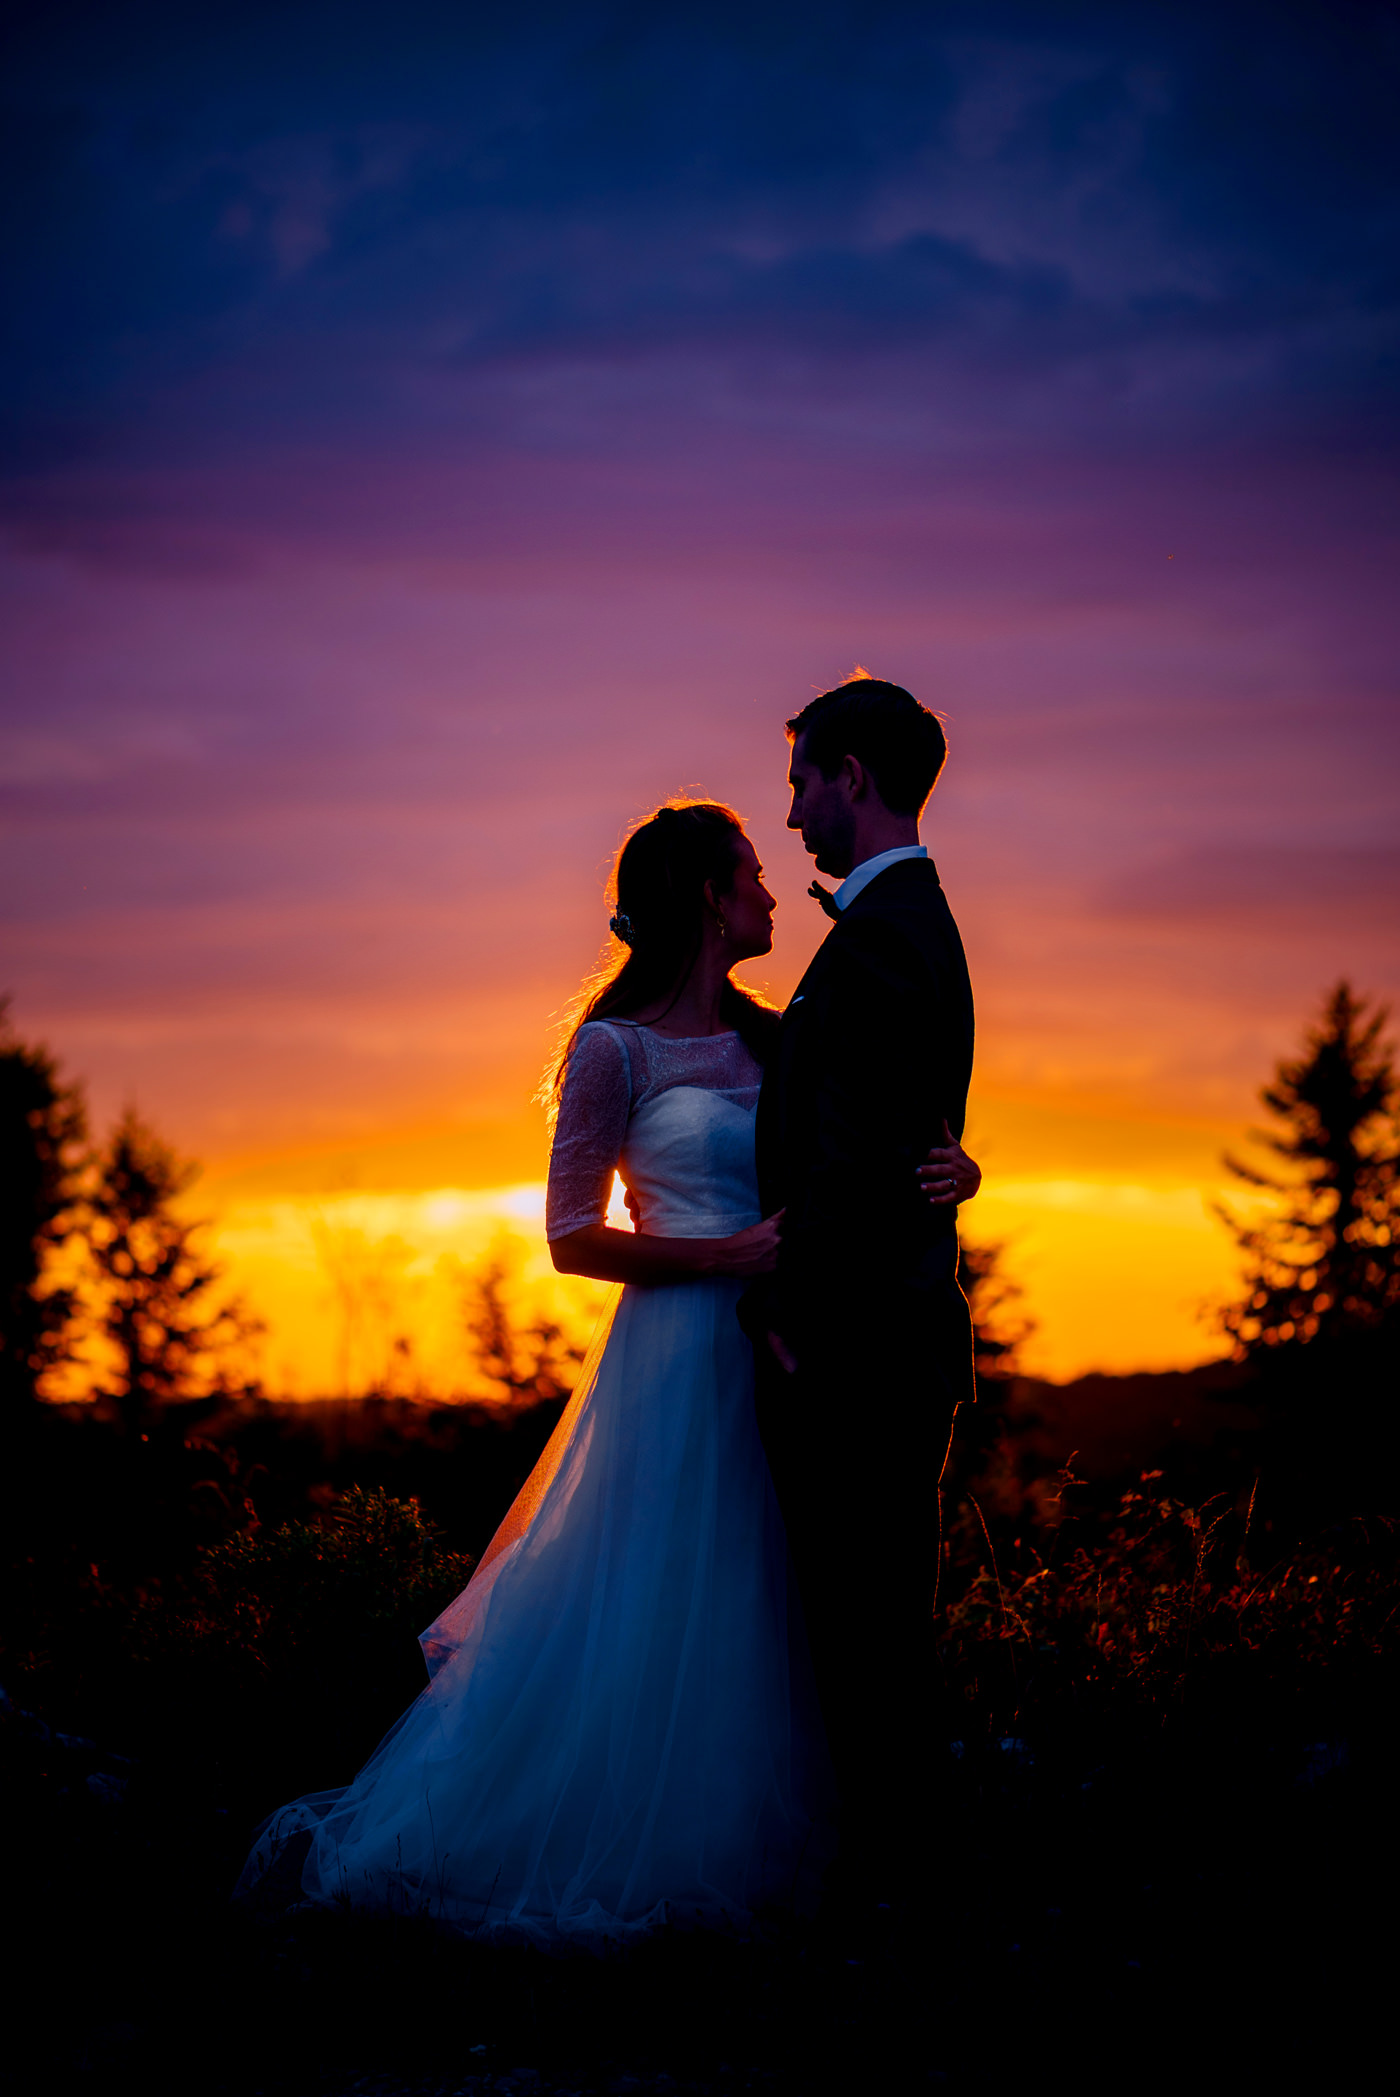 wv wedding silhouette at sunset dolly sods